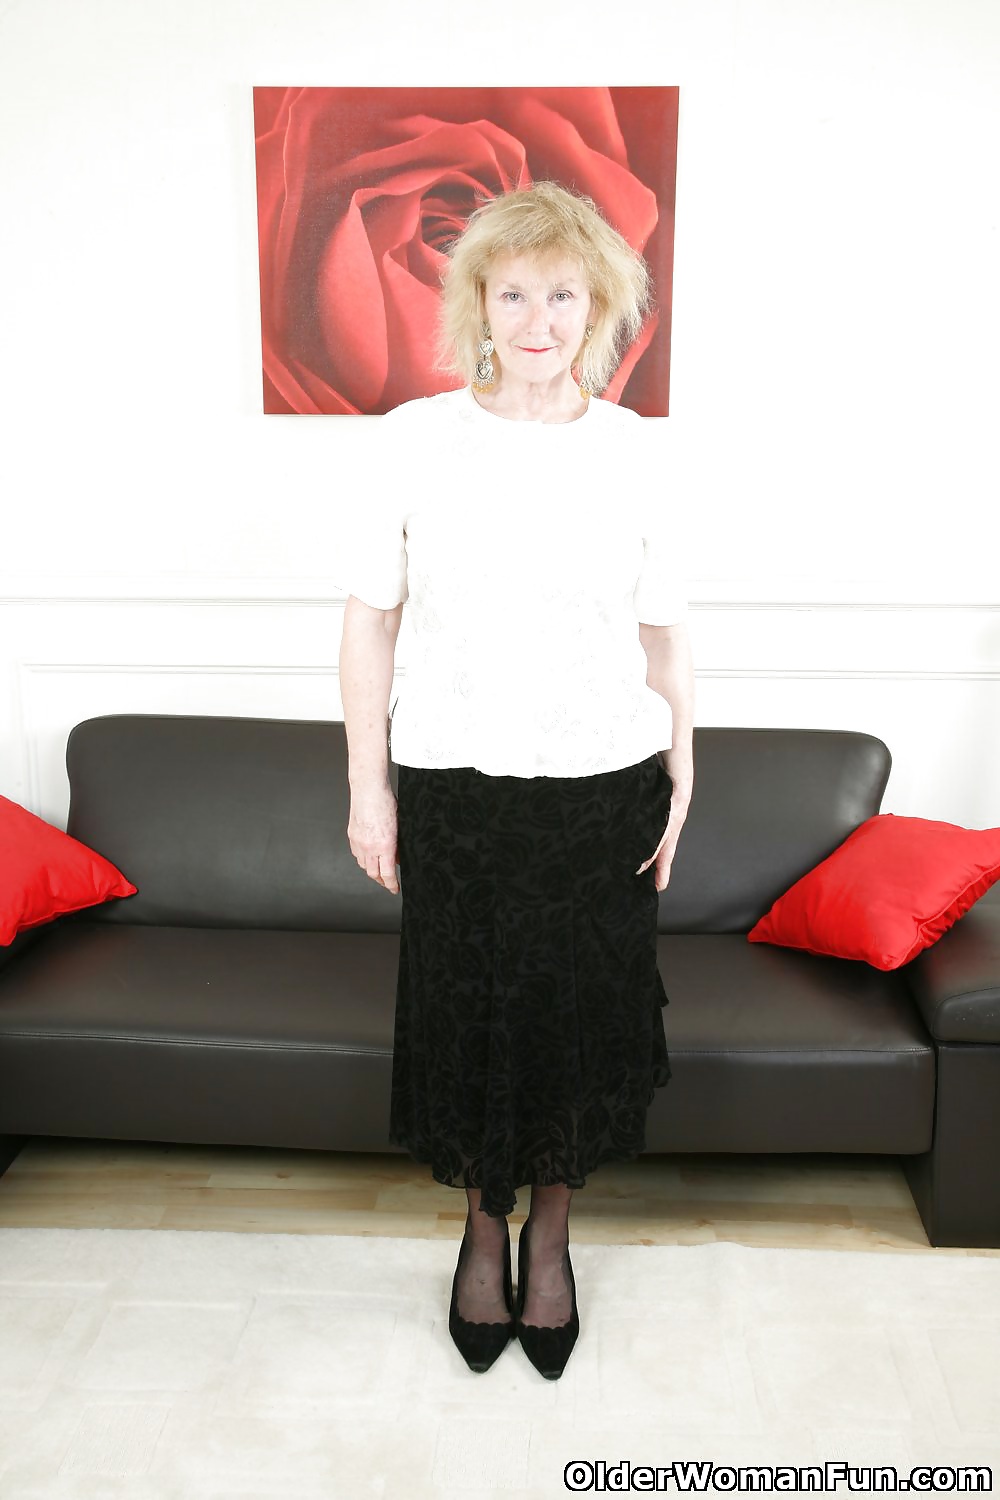 68 year old and British granny Pearl from OlderWomanFun #106943167